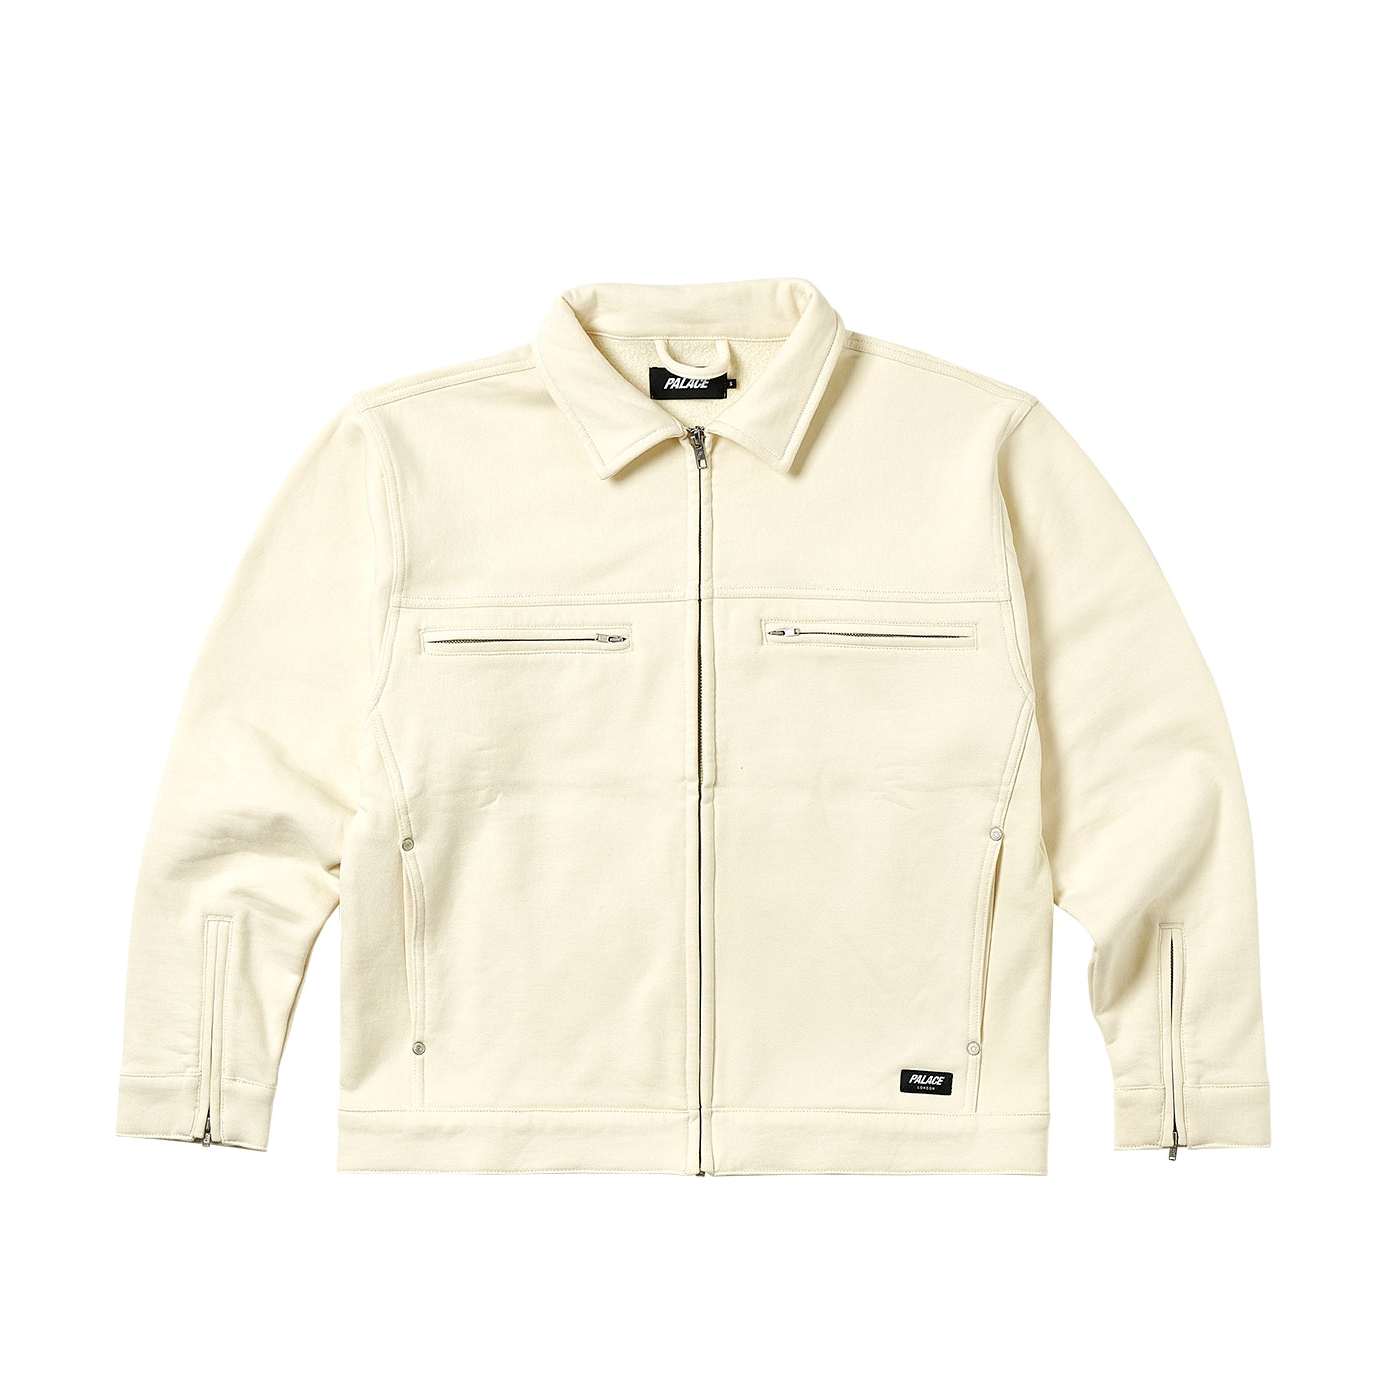 Thumbnail COMFY WORK JACKET SOFT WHITE one color